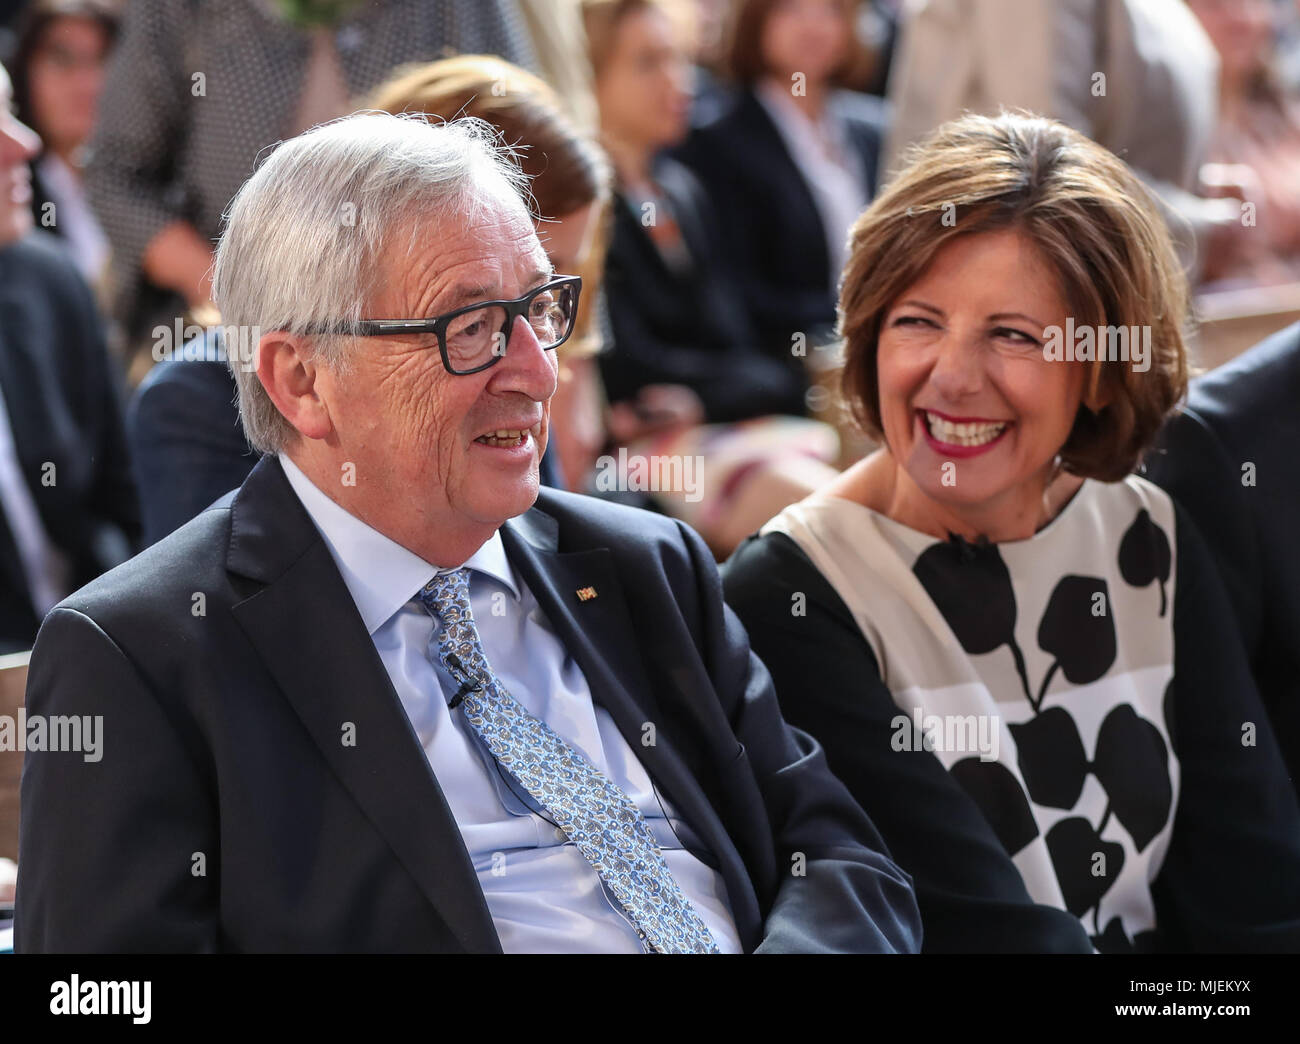 Trier, Germany. 4th May, 2018. European Commission President Jean-Claude Juncker (L) and governor of Rhineland-Palatinate Malu Dreyer talk prior to the opening ceremony of the Karl Marx exhibition, at the Basilica of Constantine in Trier, Germany, on May 4, 2018. European Commission President Jean-Claude Juncker said Friday that Karl Marx was a forward-looking philosopher and his works changed the world, as Marx's hometown Trier is marking the thinker's 200th birthday. Credit: Shan Yuqi/Xinhua/Alamy Live News Stock Photo